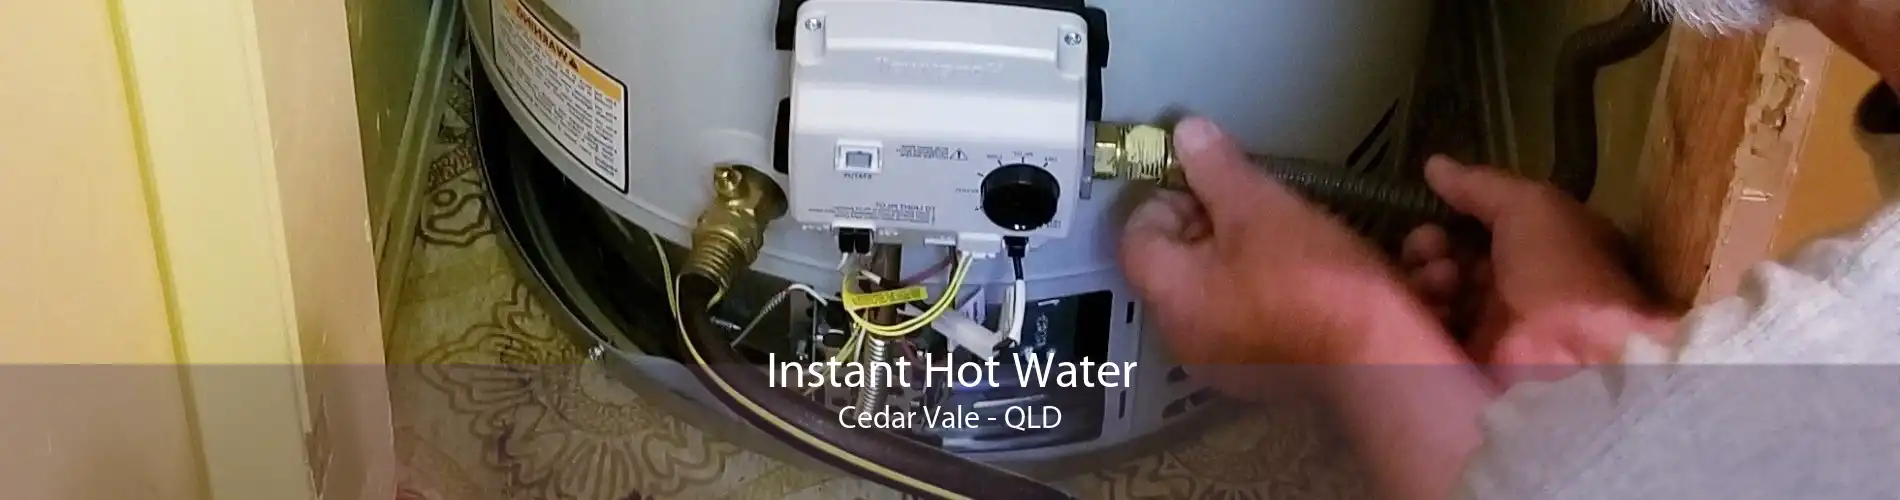 Instant Hot Water Cedar Vale - QLD